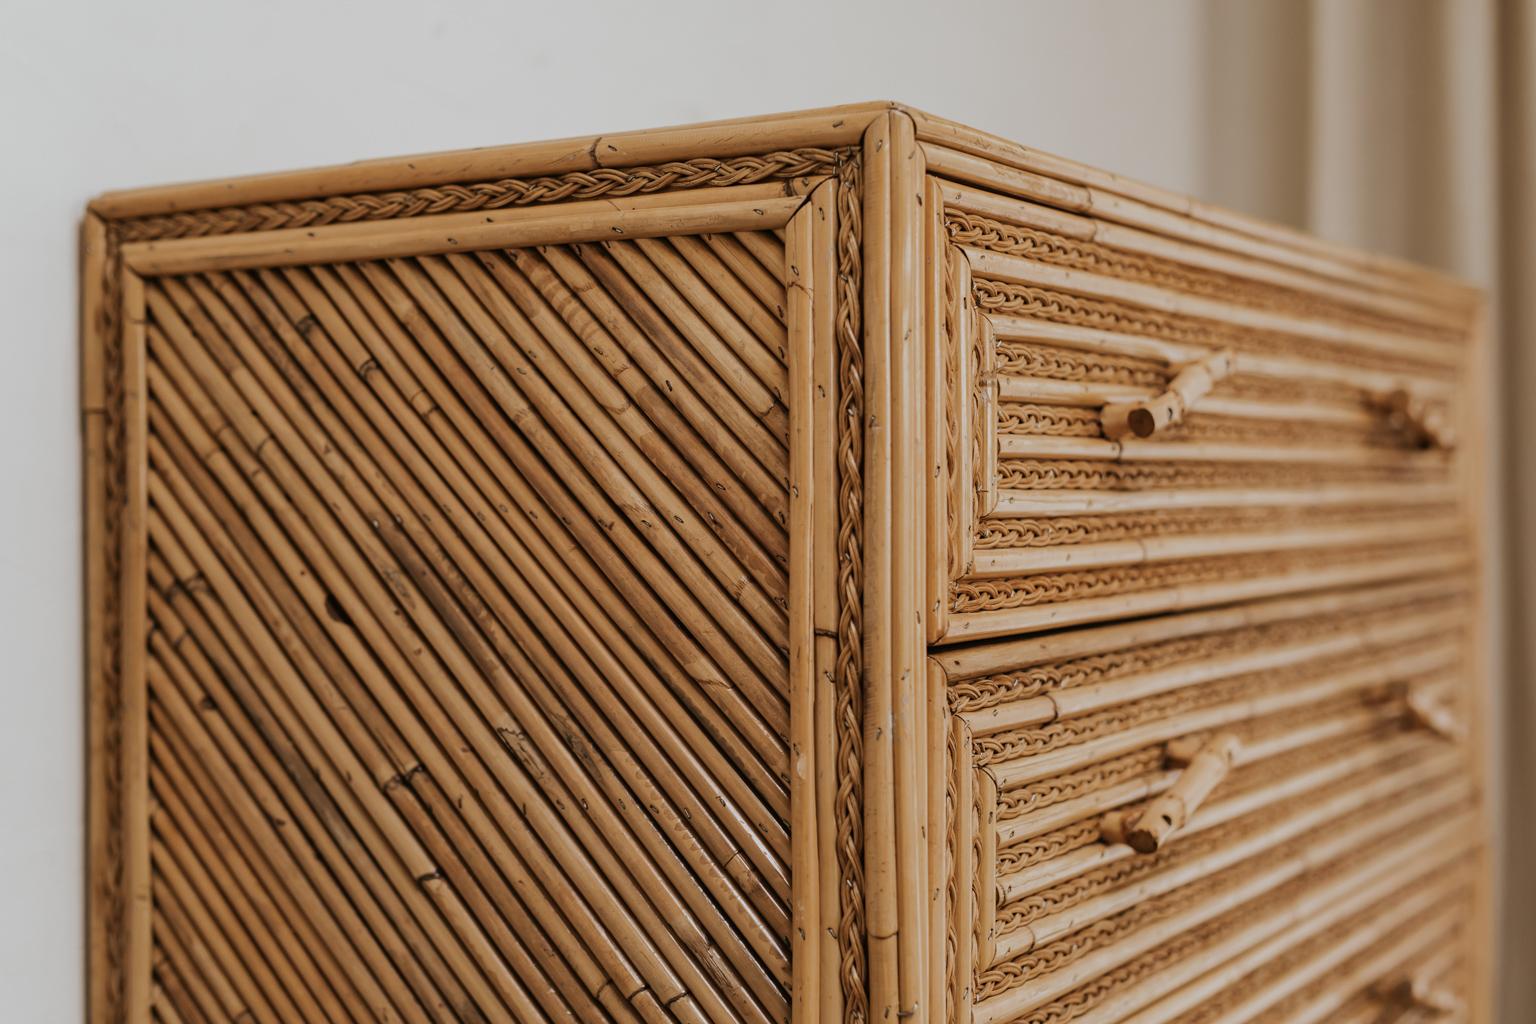 A charming rattan or wicker chest of drawers in mint condition, made in Spain during the 1970s, great details.